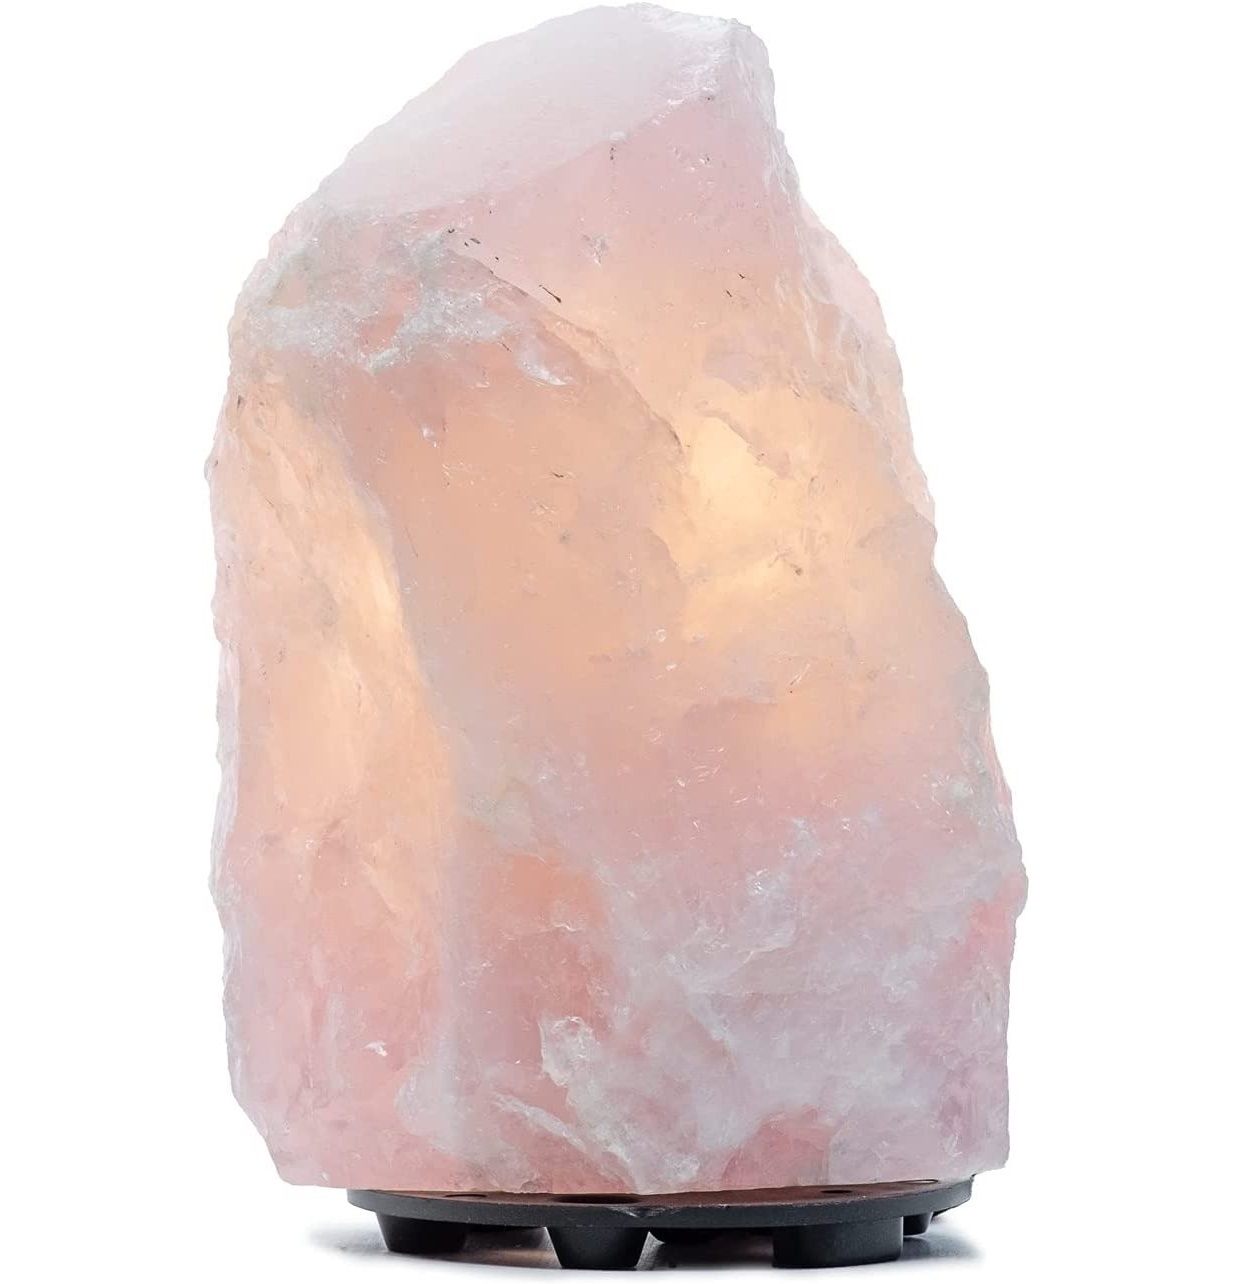 Dimmable Quartz Crystal Lamp